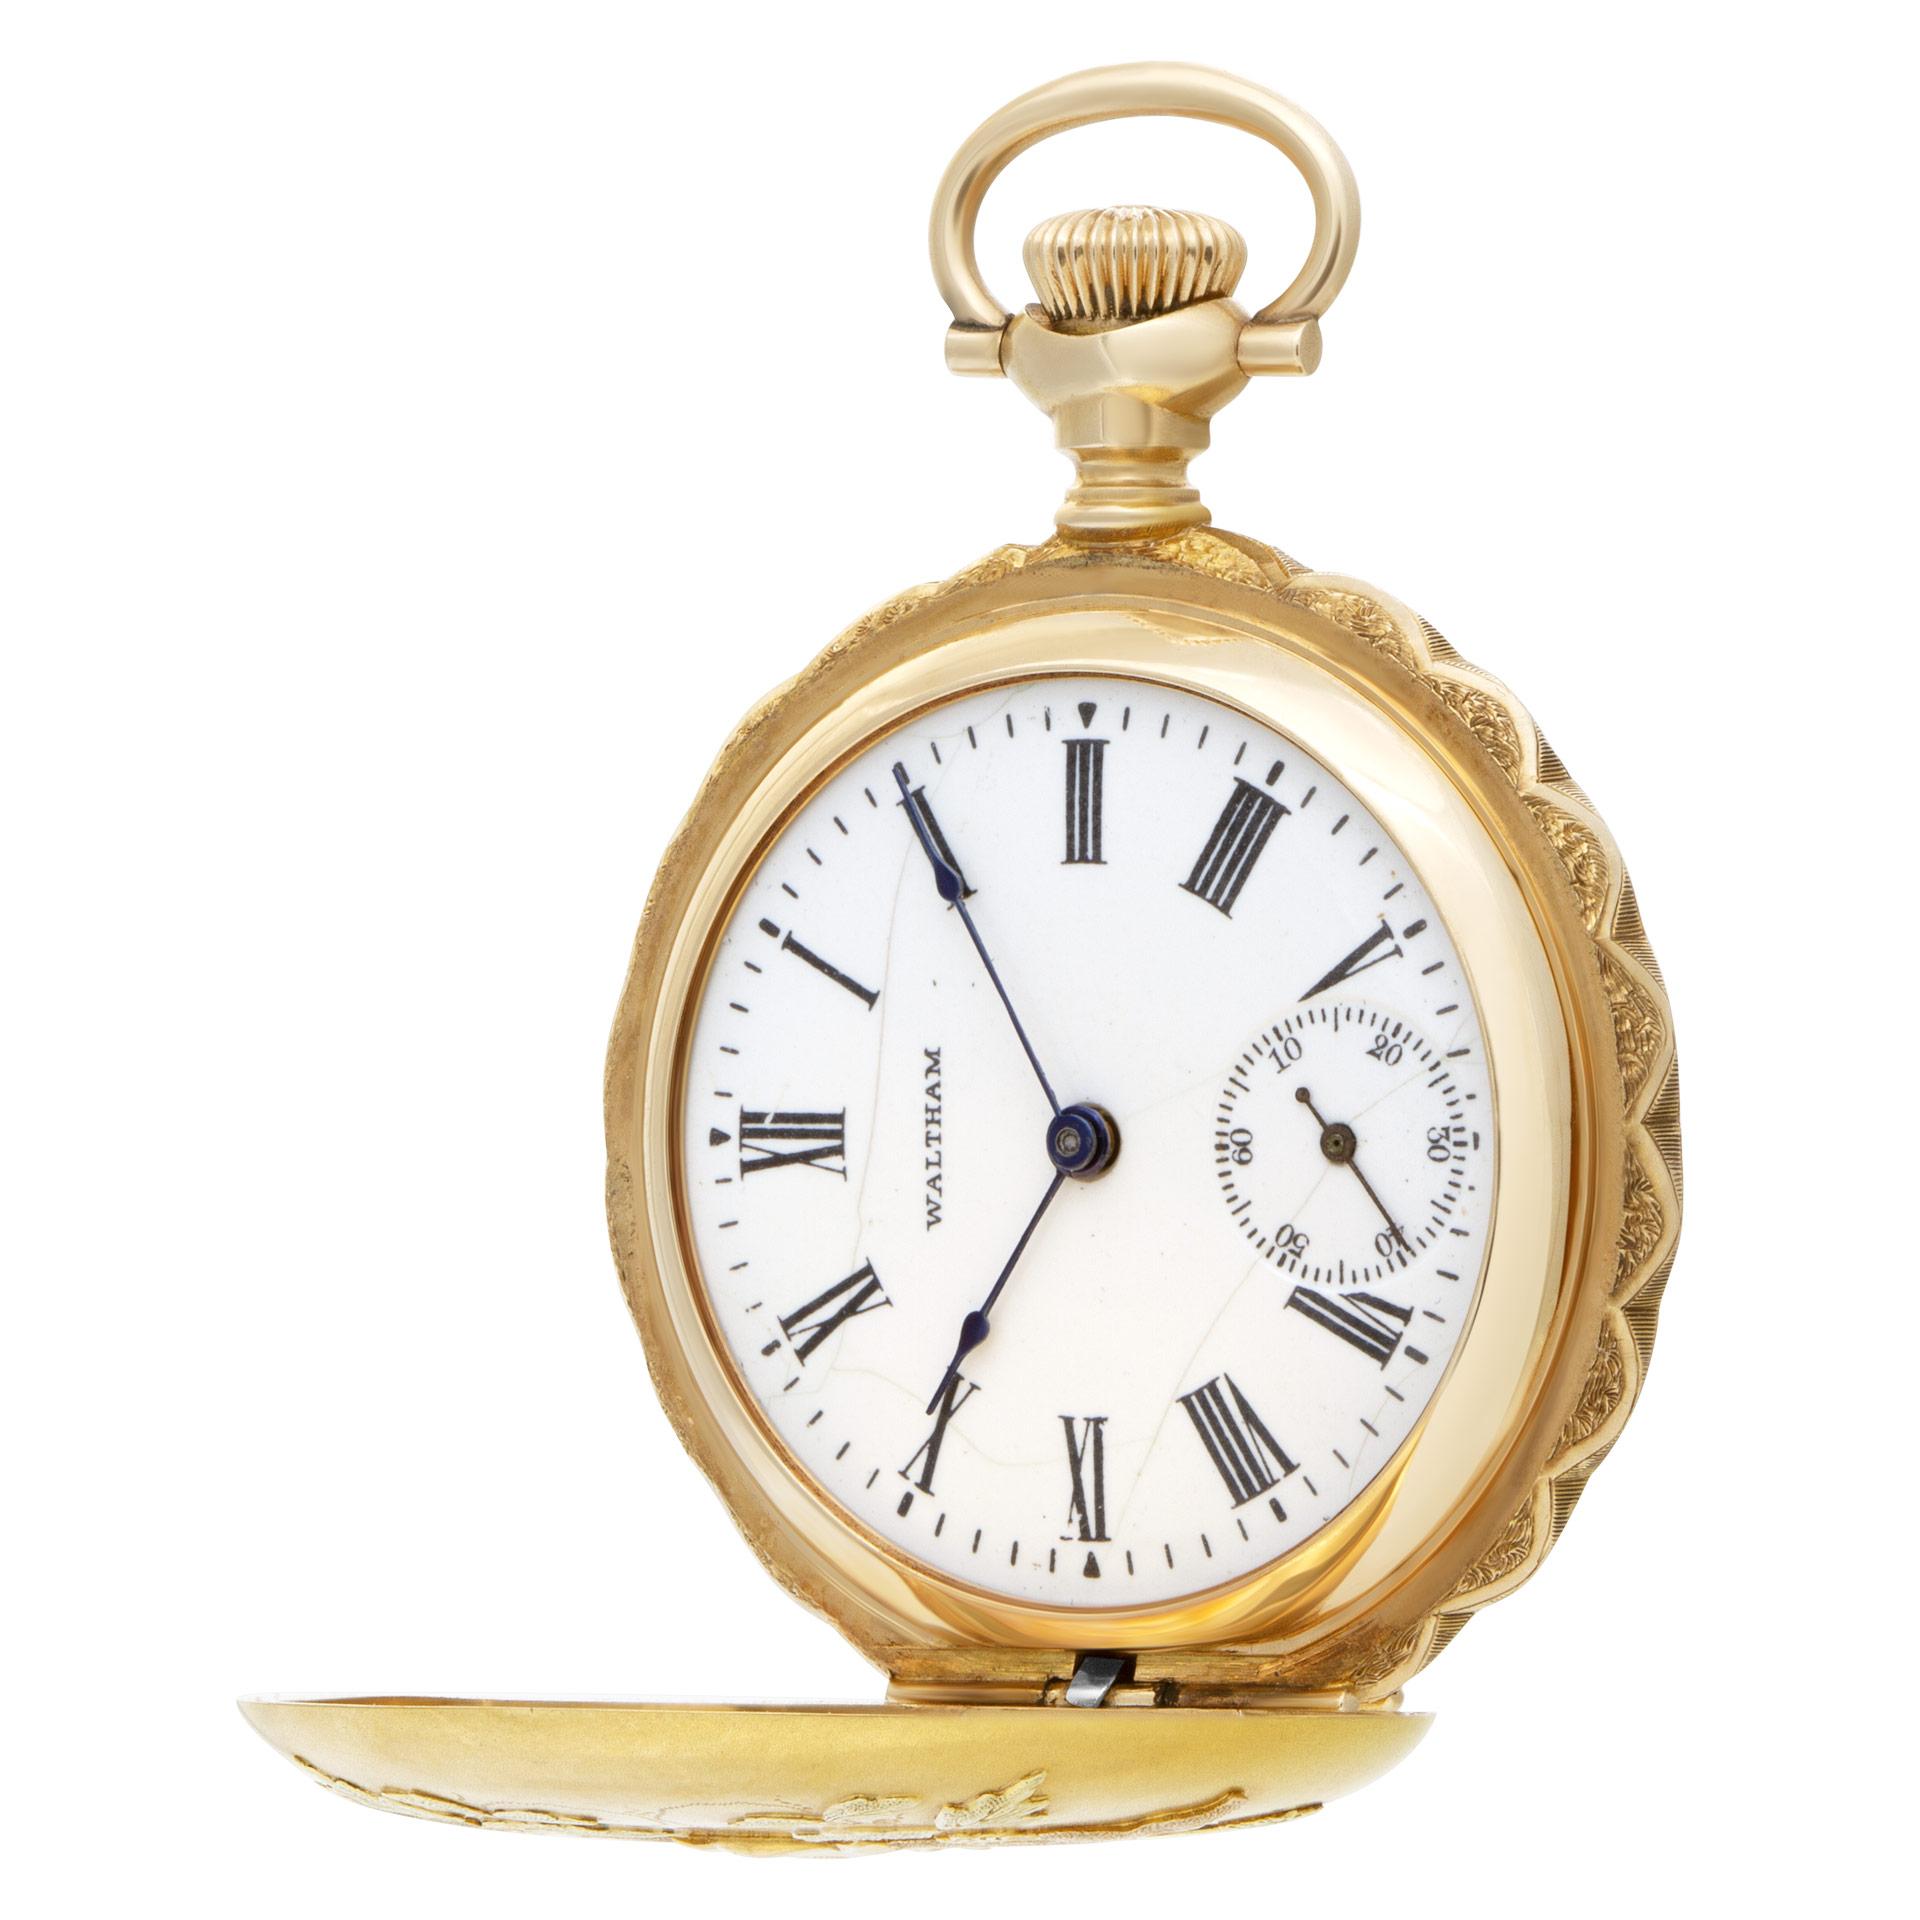 Waltham hunter case pocket watch in 14k yellow, rose and green gold. Decorative high relief pink and yellow floral embellishments on both sides of the case. Scalloped edge design hunter case. 35mm case diameter (0 size). Manual wind 15 jewel